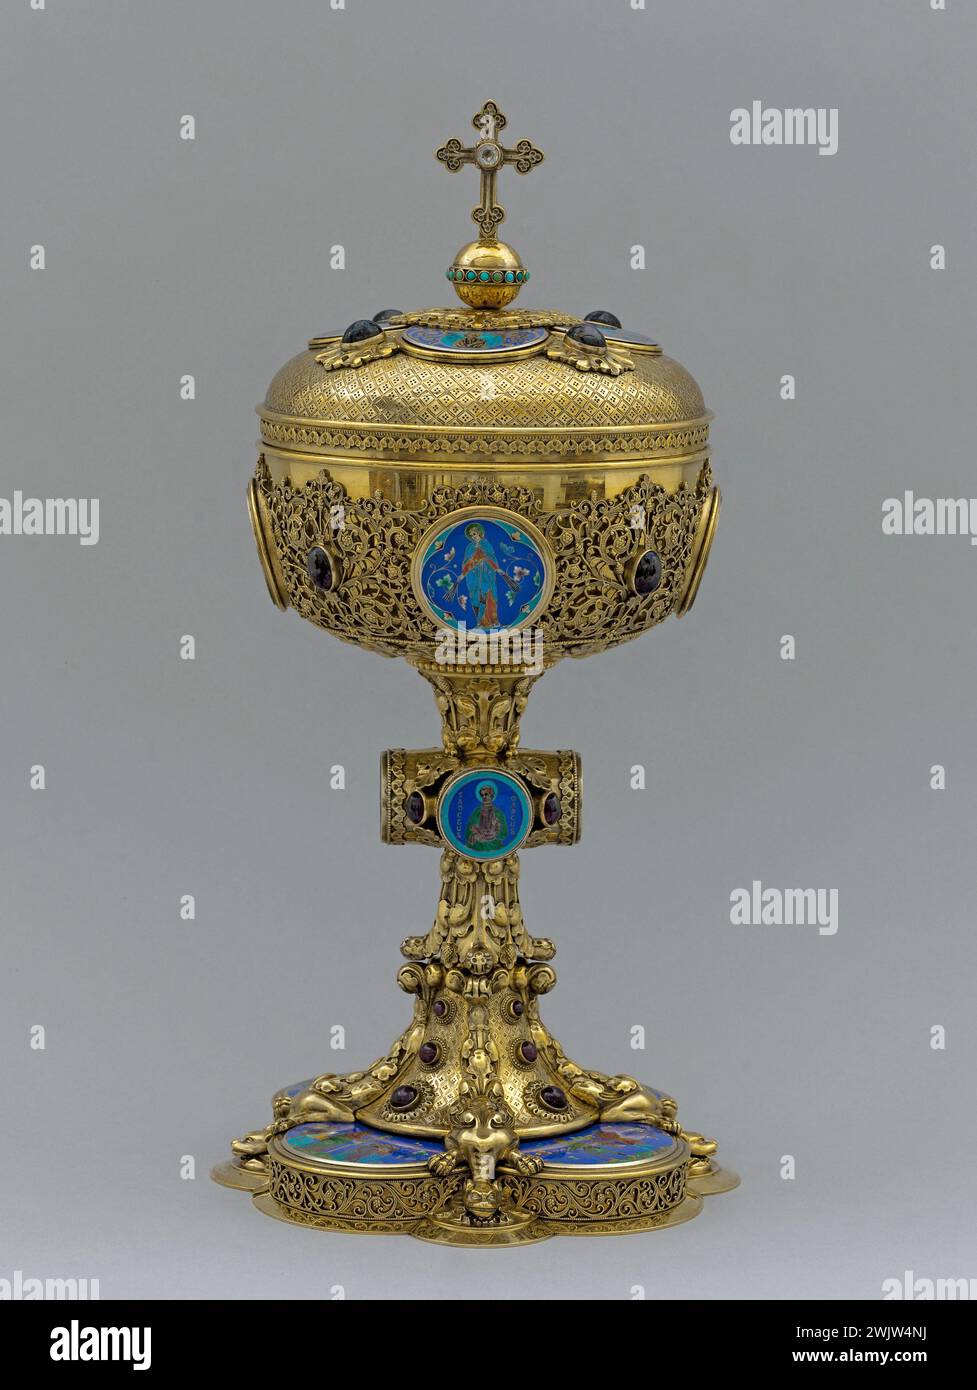 Placide Poussielgue-Rusand (1829-1889). 'Ciborian'. Golden silver, stamped, molded and chopped, enamels, grenats, turquoise and rock crystal. After 1850. Museum of Fine Arts of the City of Paris, Petit Palais. 71340-5 Silver dore print, silver cisele mold, chretian, ciborium, rock crystal, cross, email, evangelist, garnet, book, religious object, orfevrery, precious stone, Catholic religion, saint, turquoise, 19th century Stock Photo